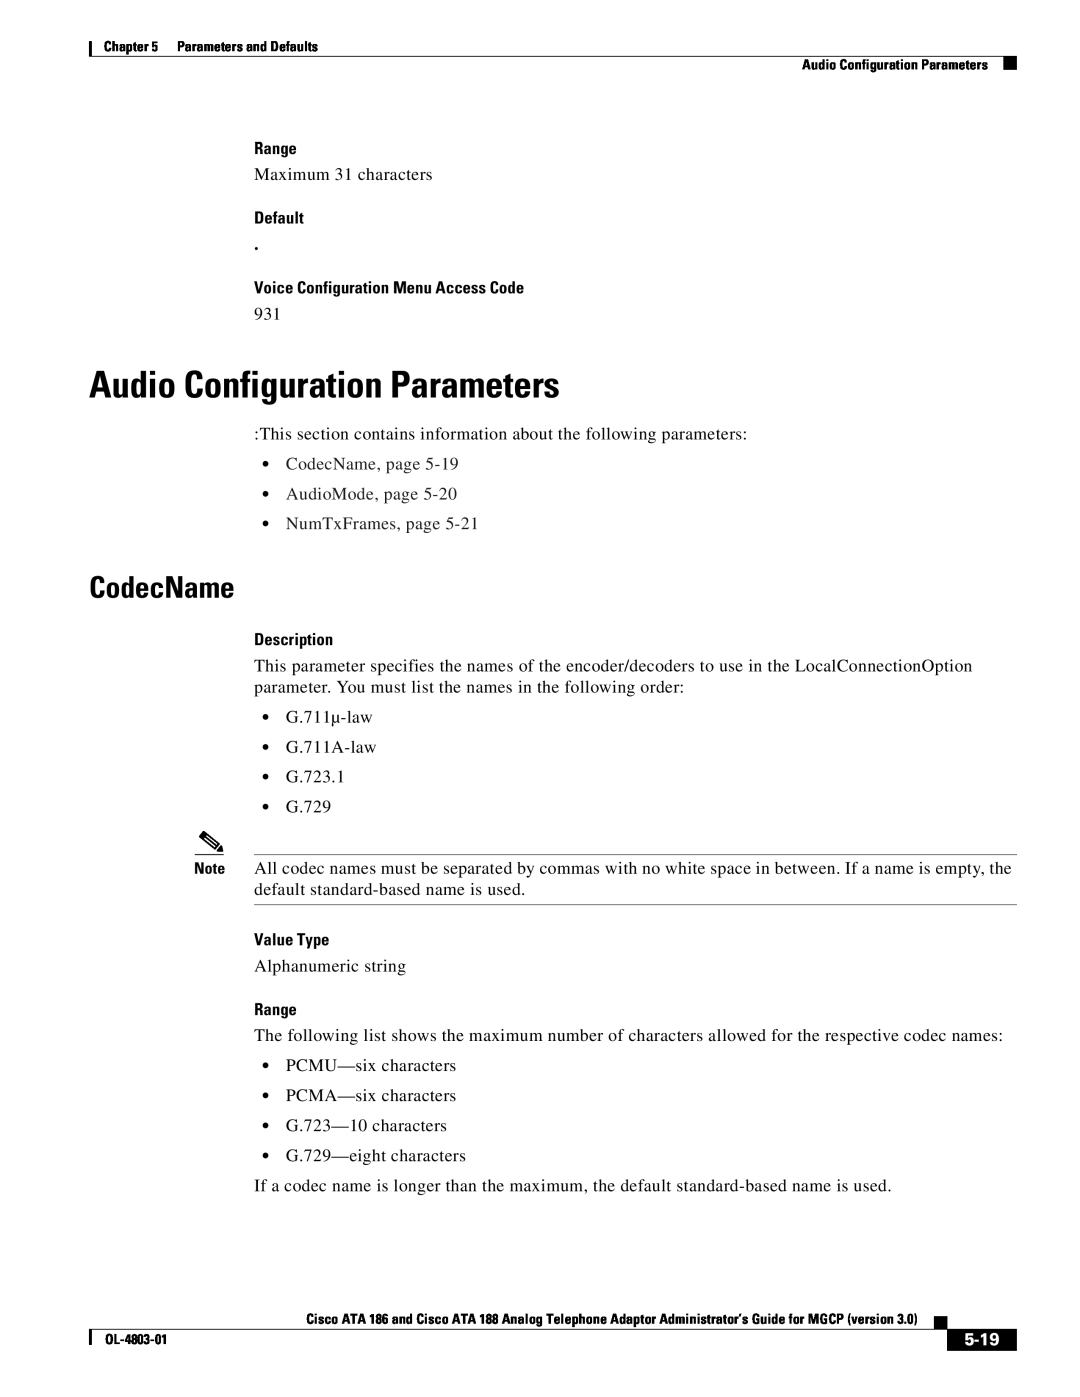 Cisco Systems ATA 188 Audio Configuration Parameters, CodecName, page AudioMode, page NumTxFrames, page, 5-19, Range 